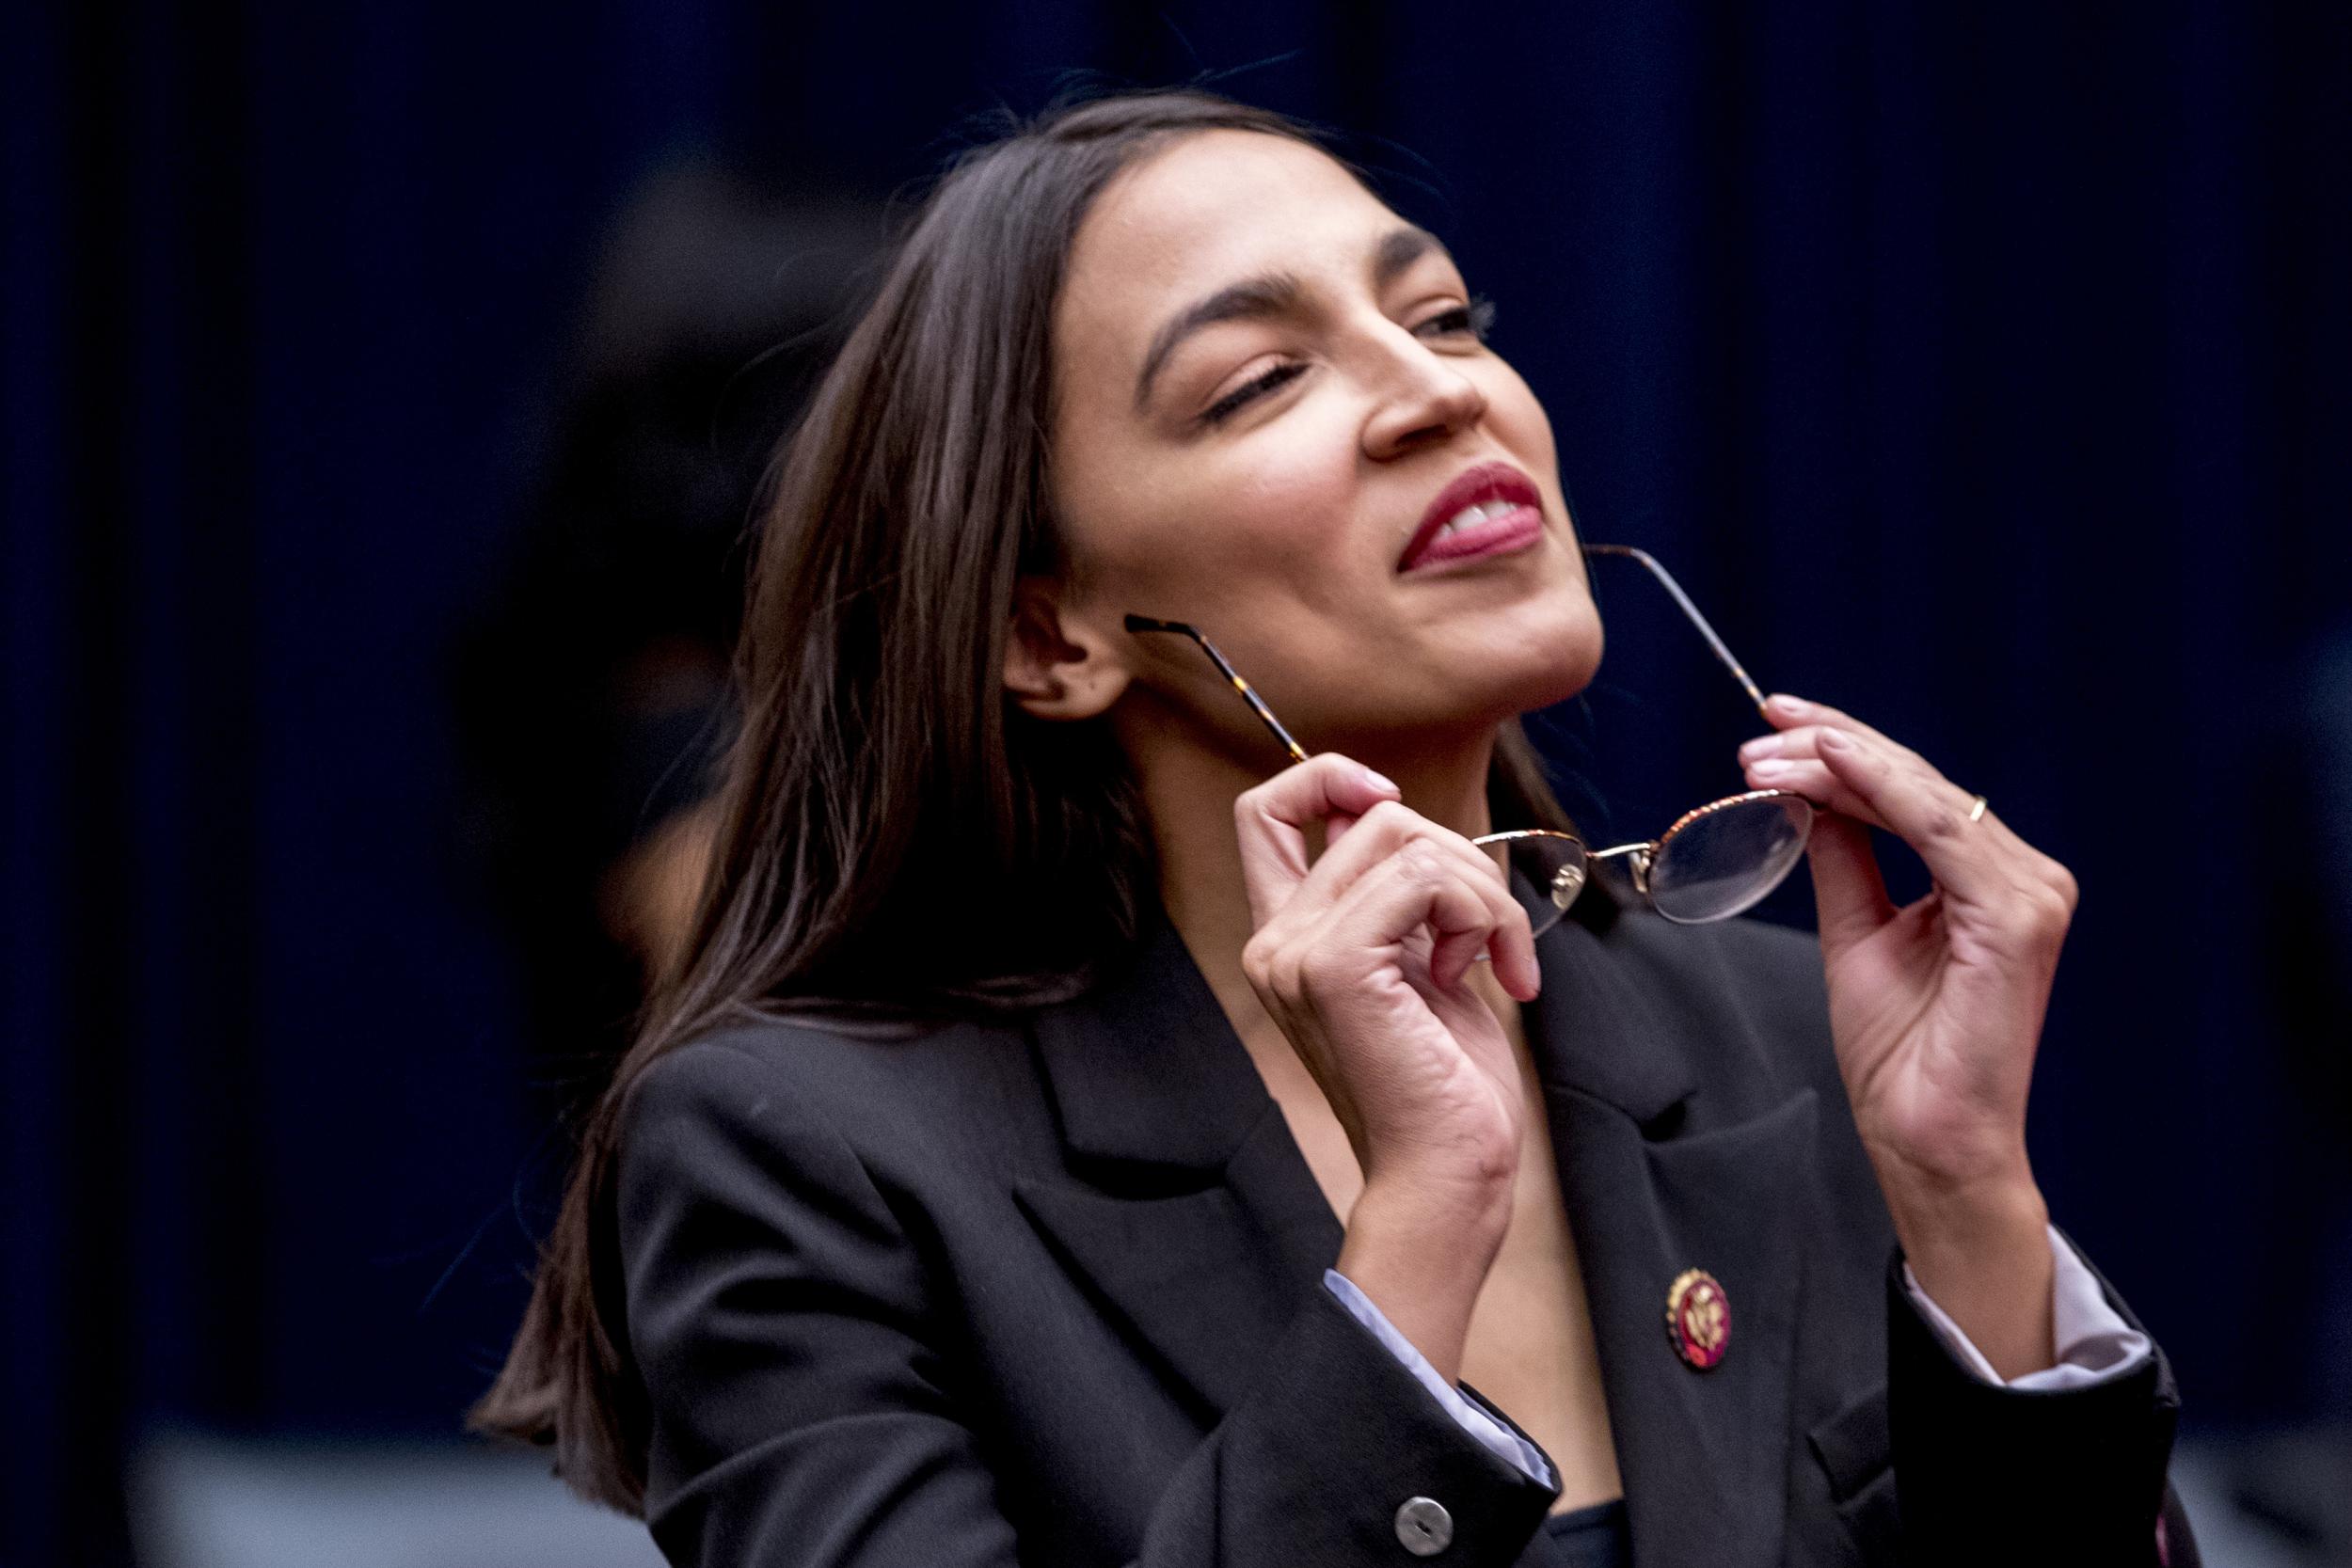 If you think AOC is being praised too much for challenging Mark Zuckerberg, you're right